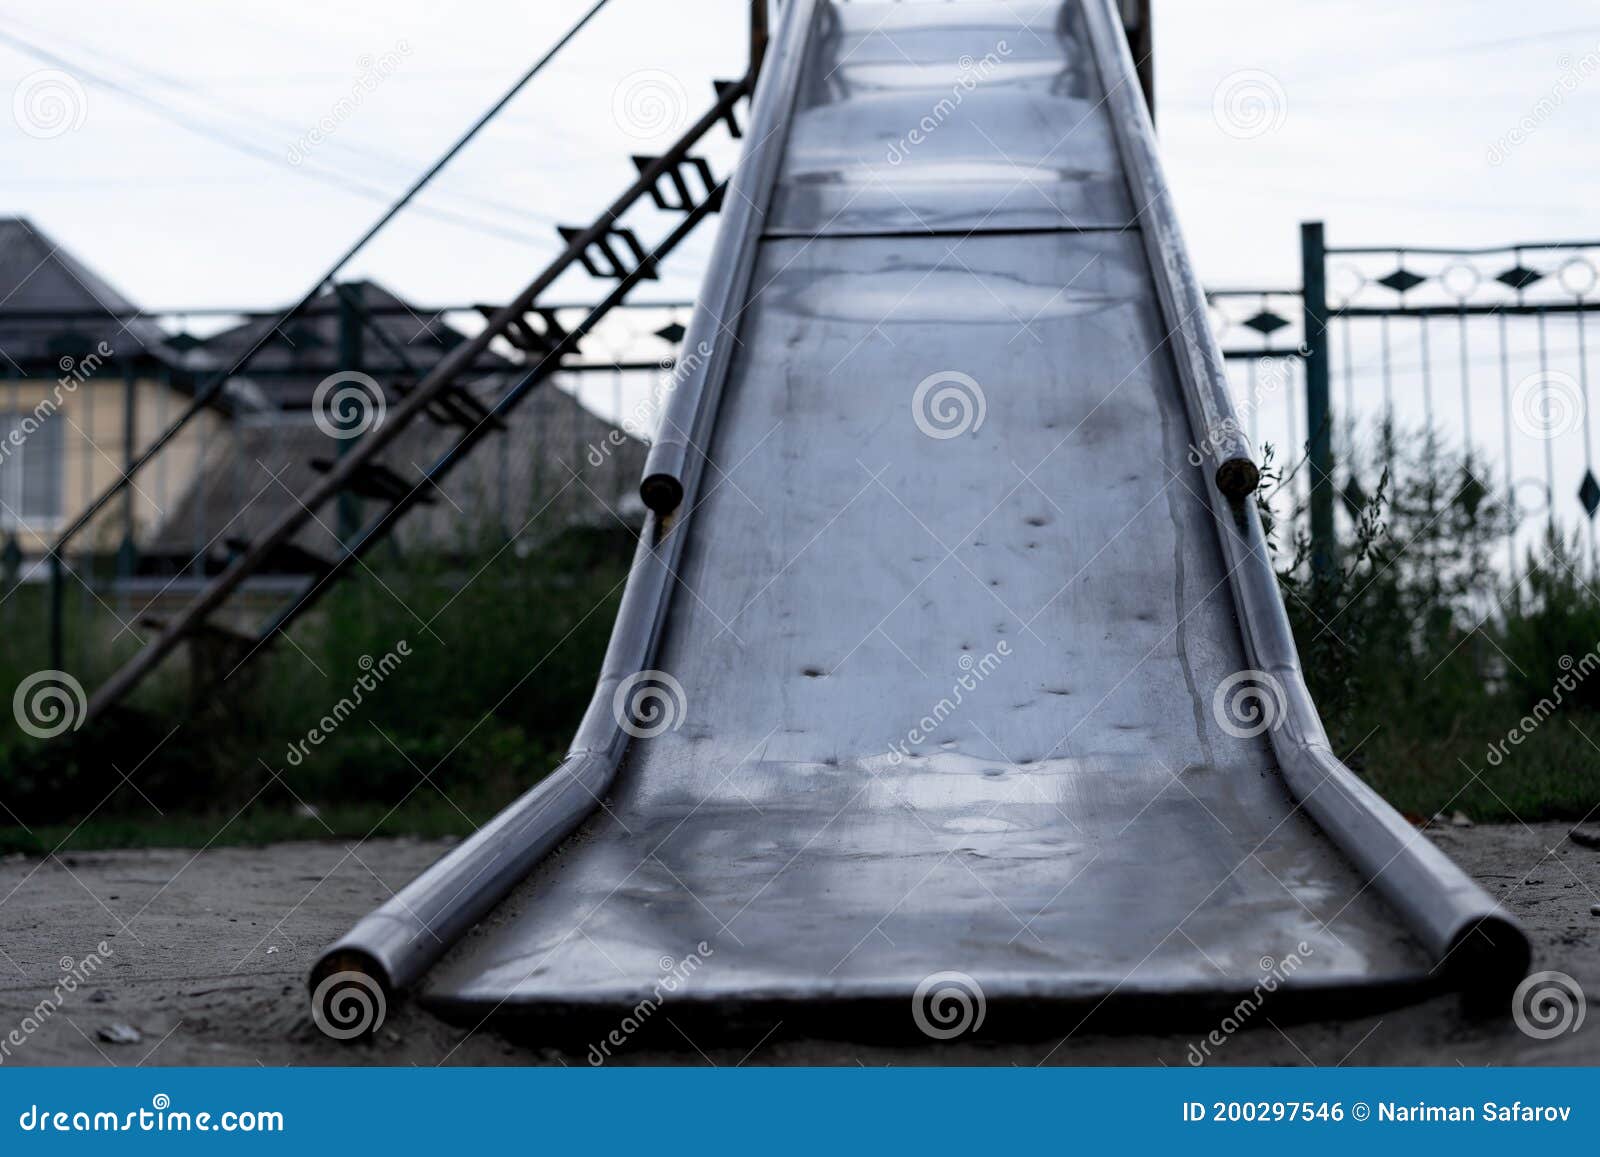 Old Playground With A Metal Slide Stock Photo Image Of Vintage